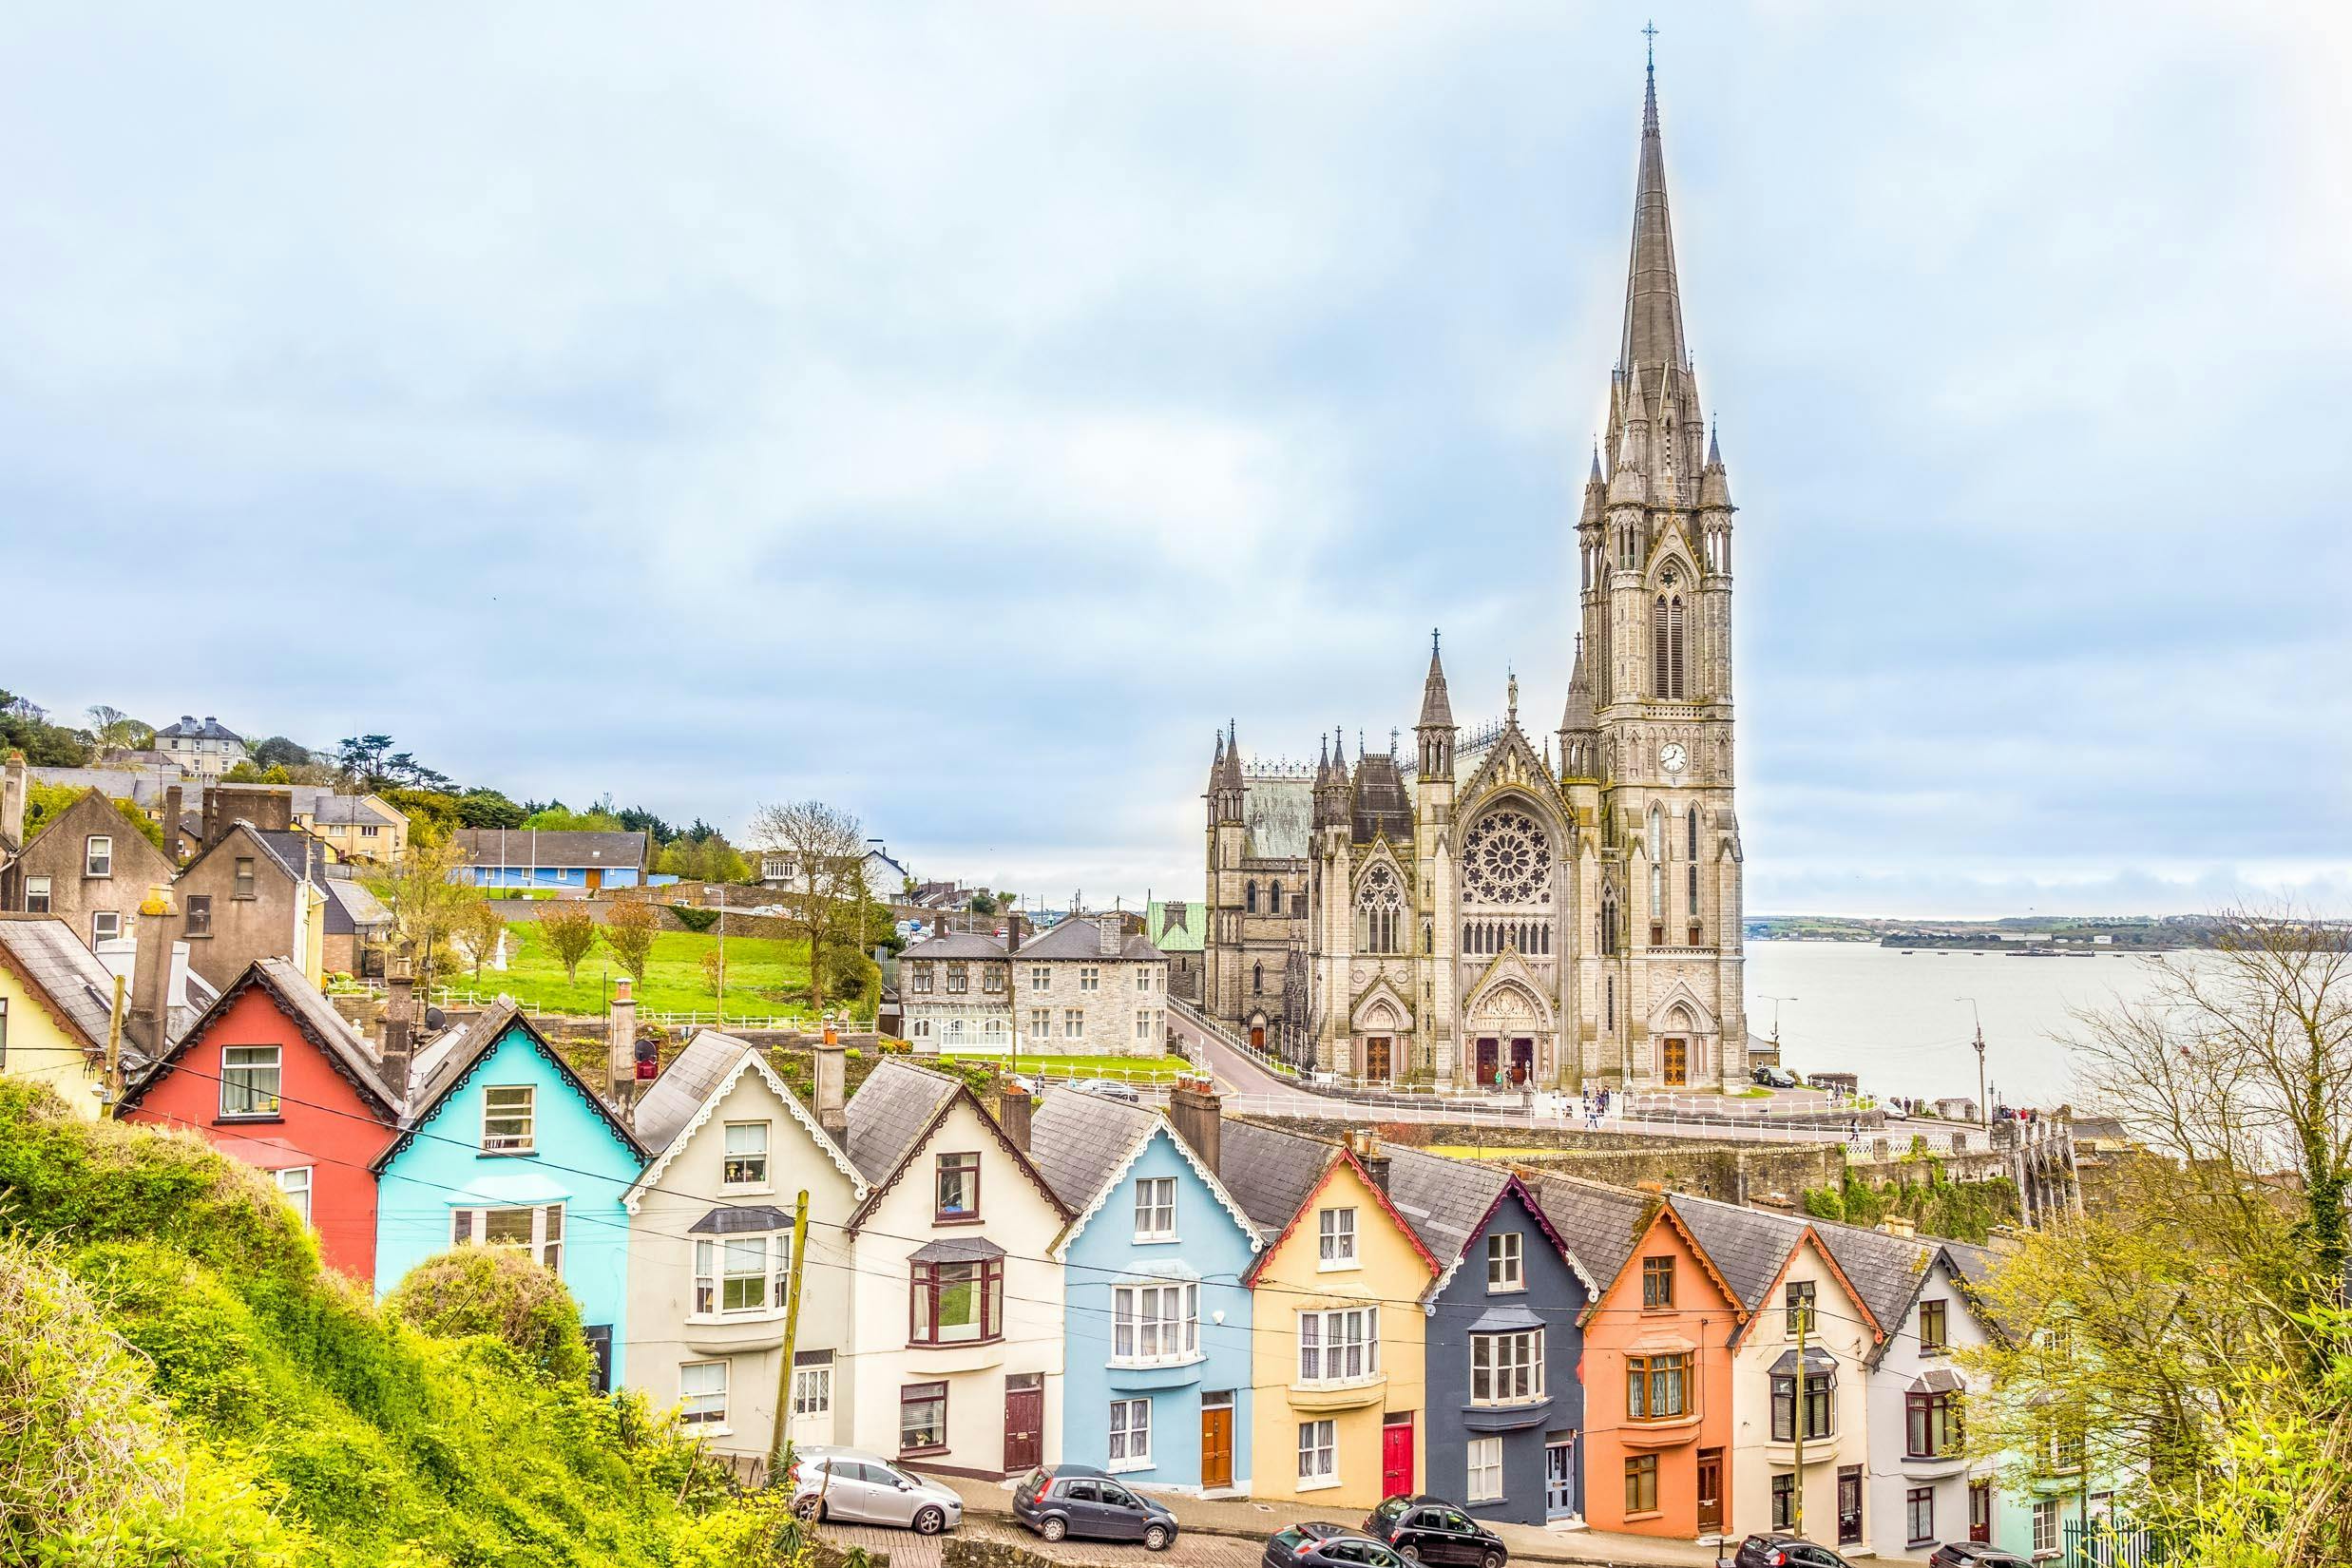 Cathedral and colored houses in Cobh, County Cork, Ireland.